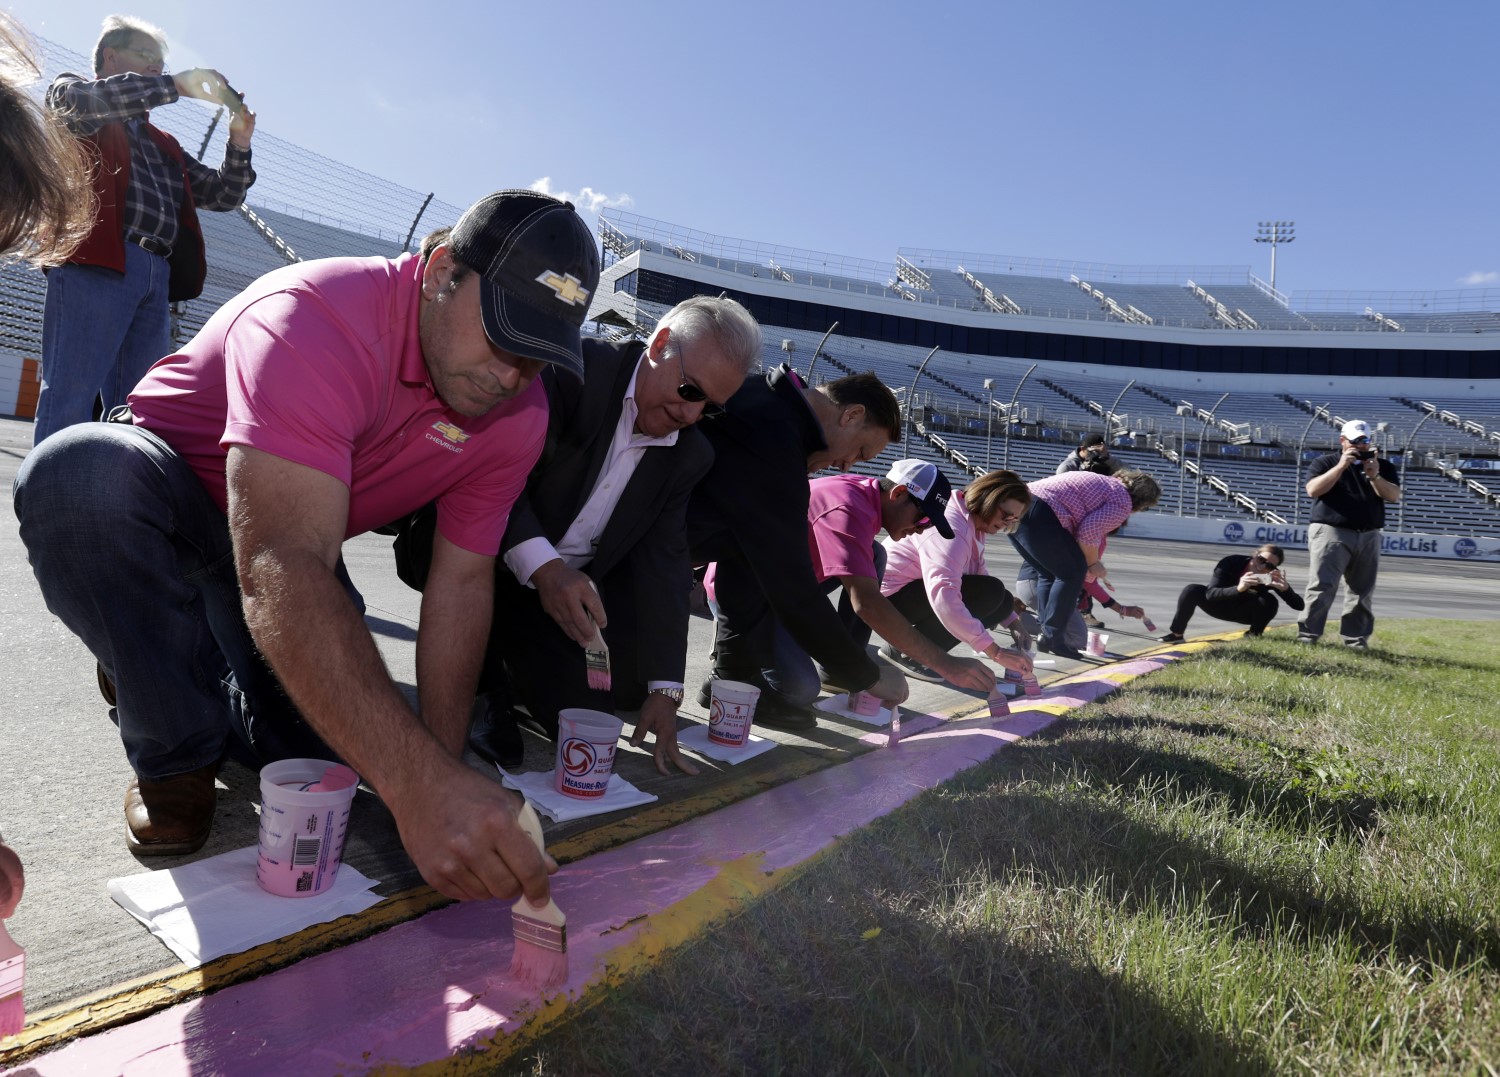 Newman and Larson paint the curbs pink